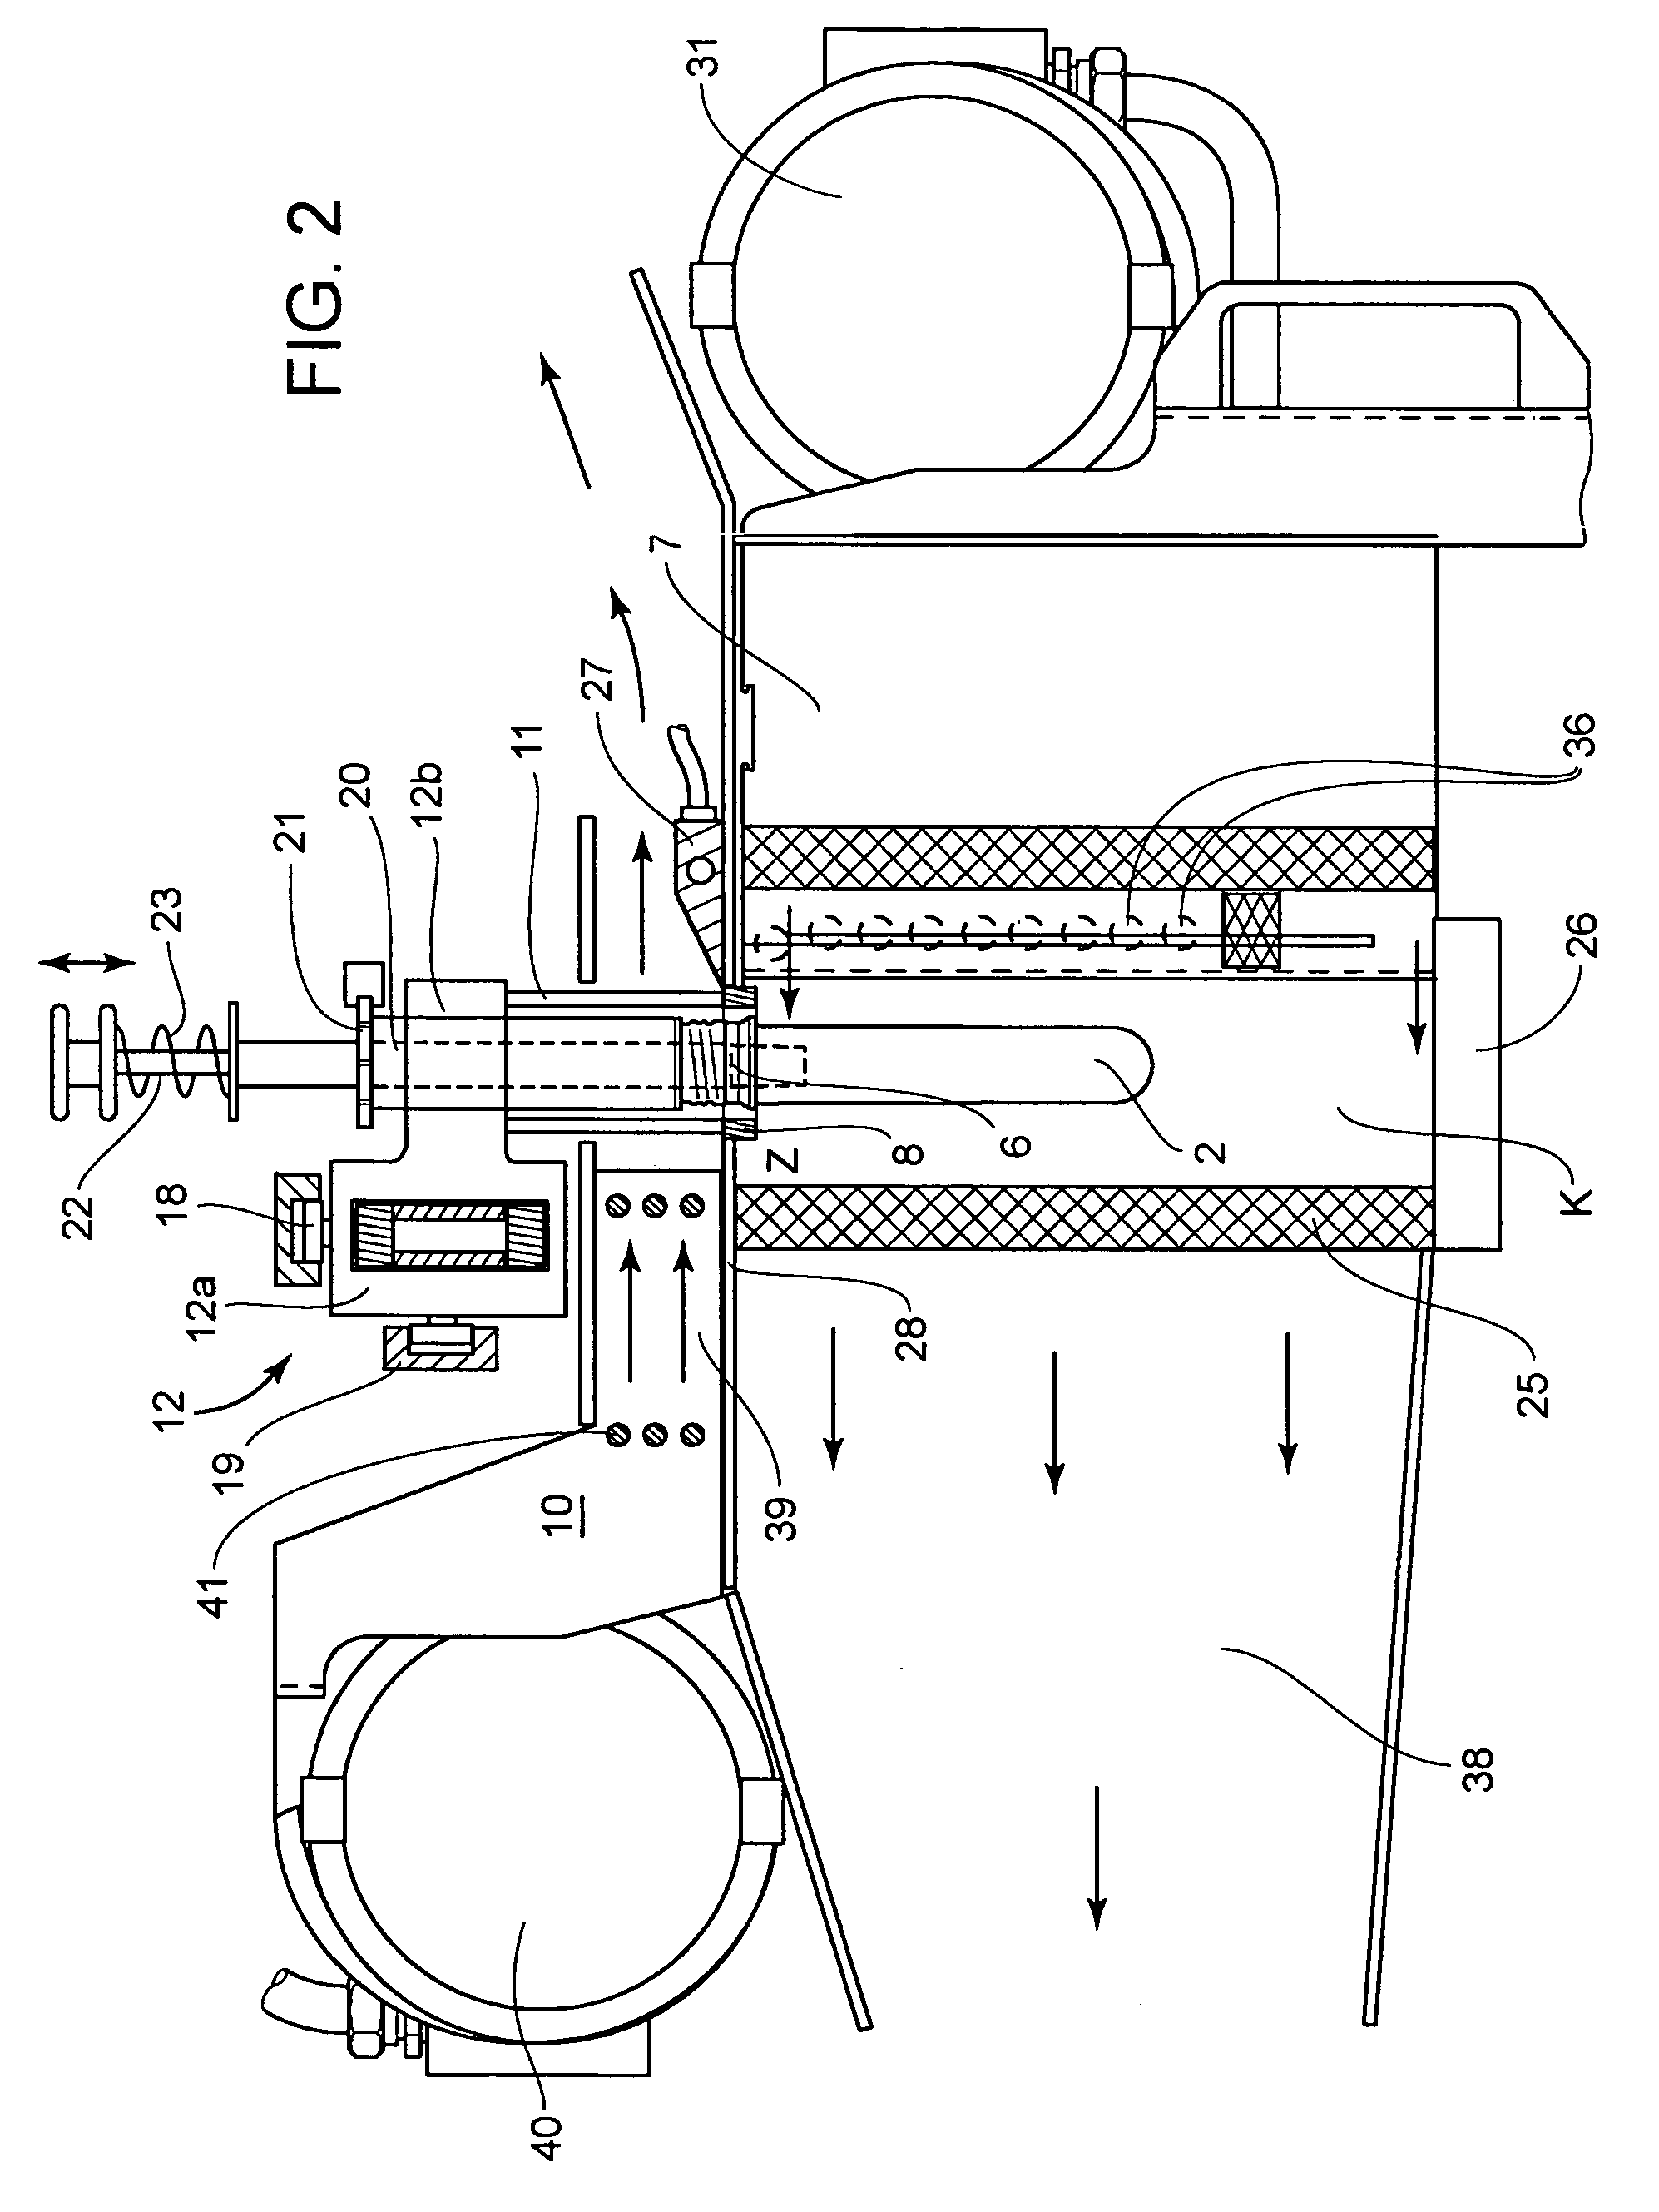 Device for heating preforms provided with supporting ring